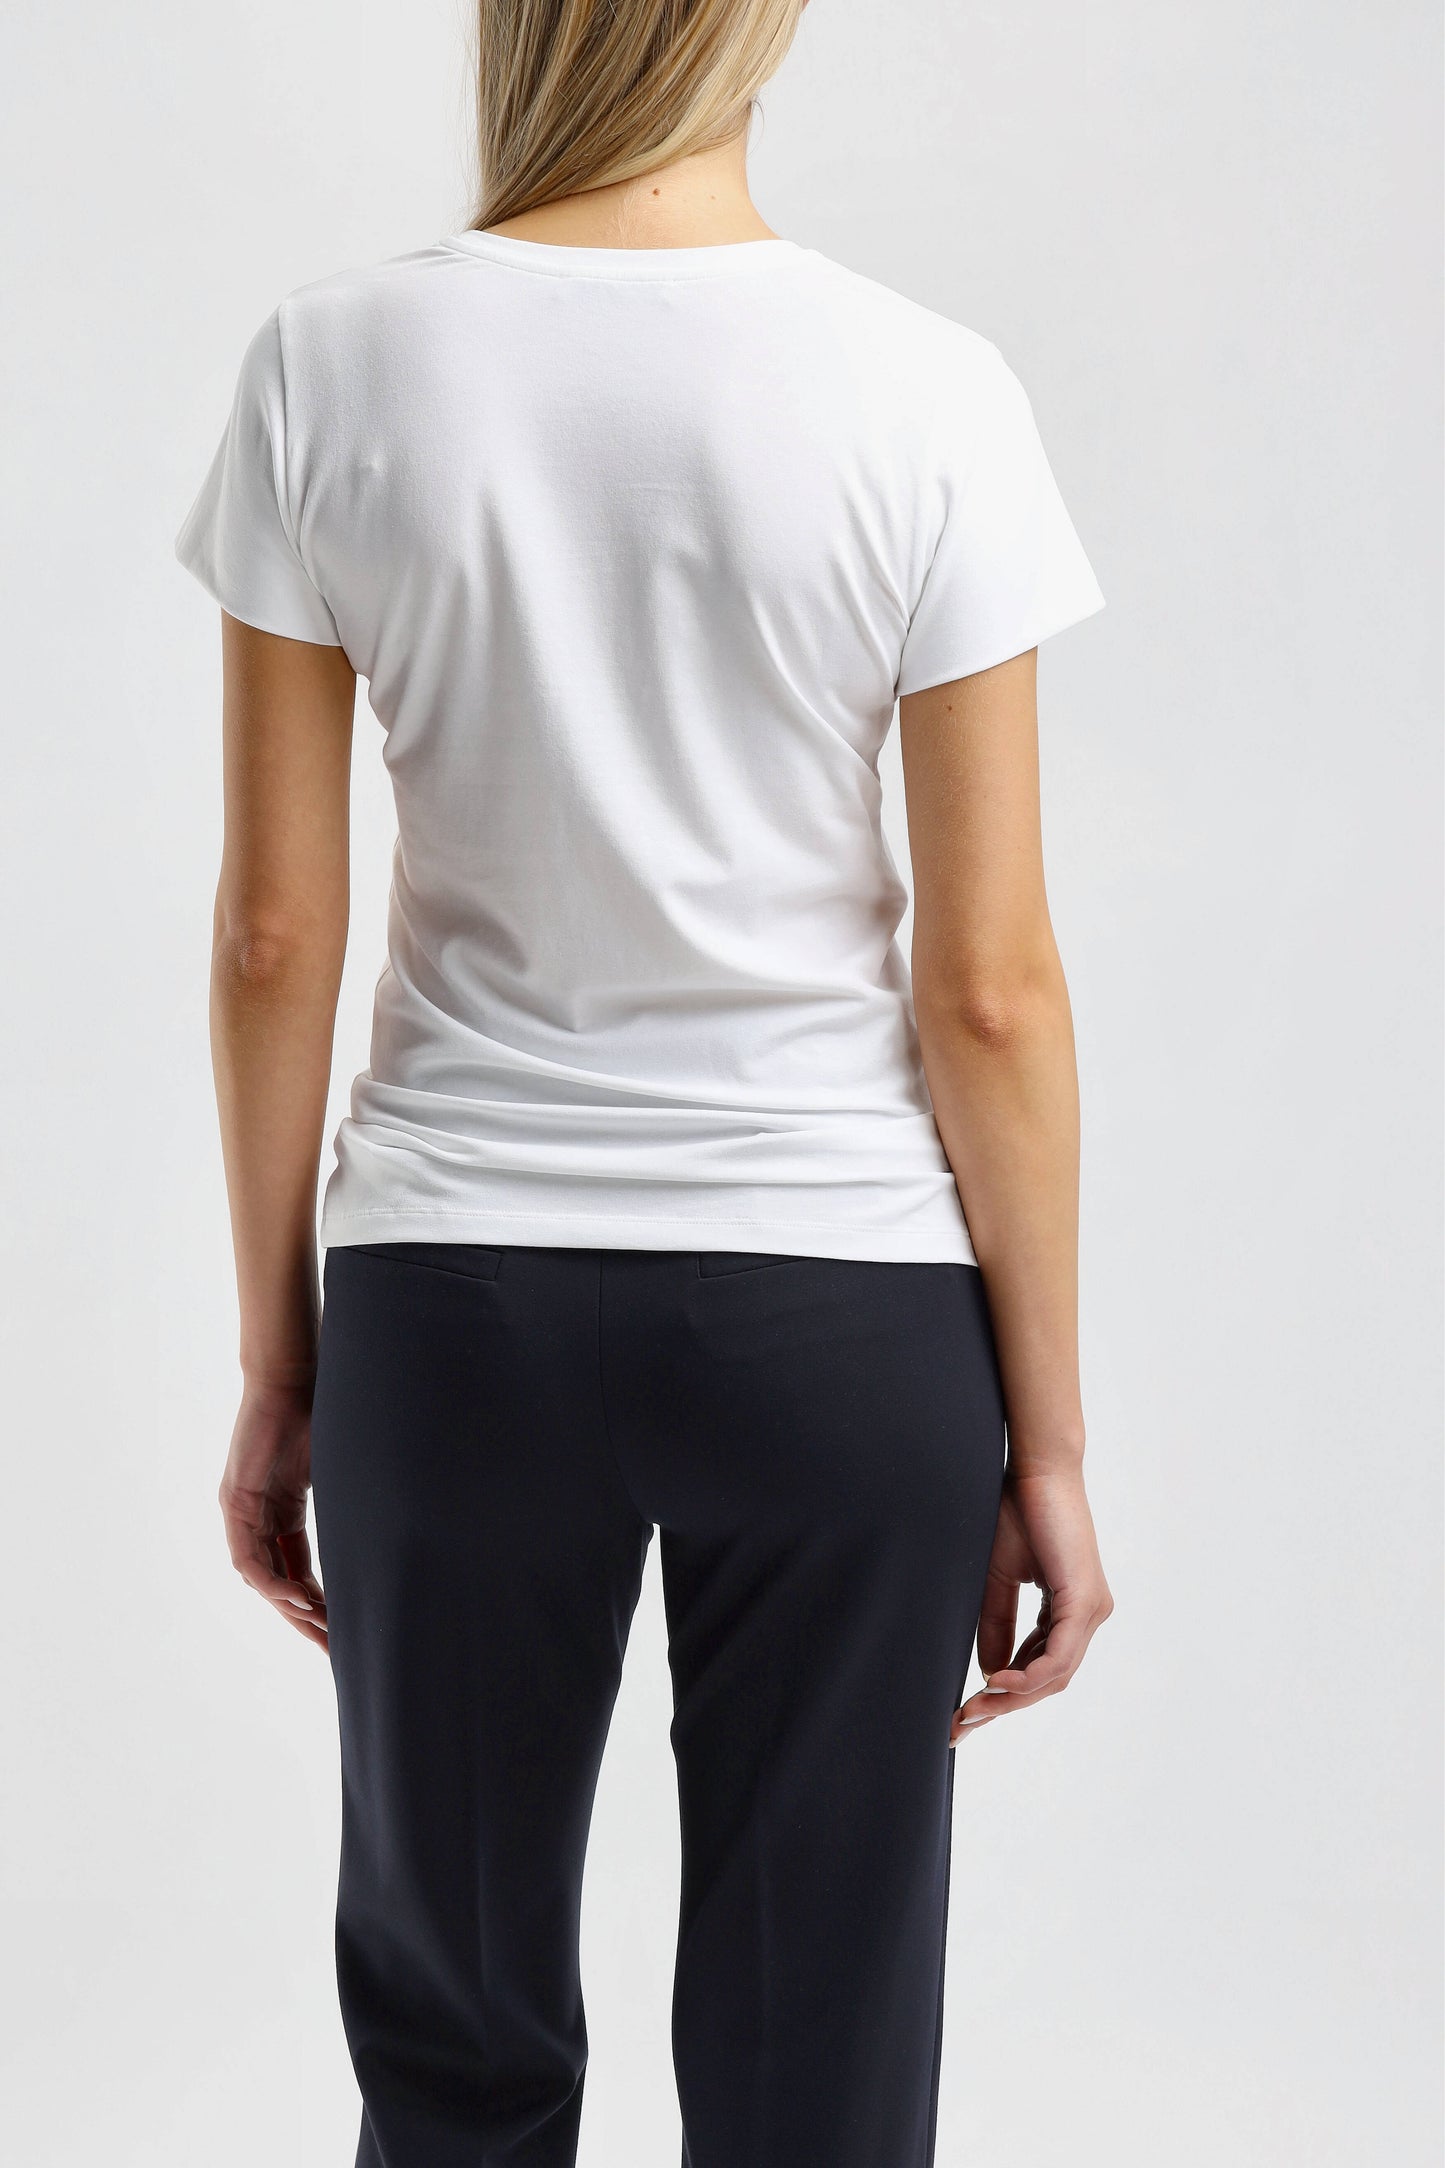 T-Shirt All Time in Camellia WeißDorothee Schumacher - Anita Hass